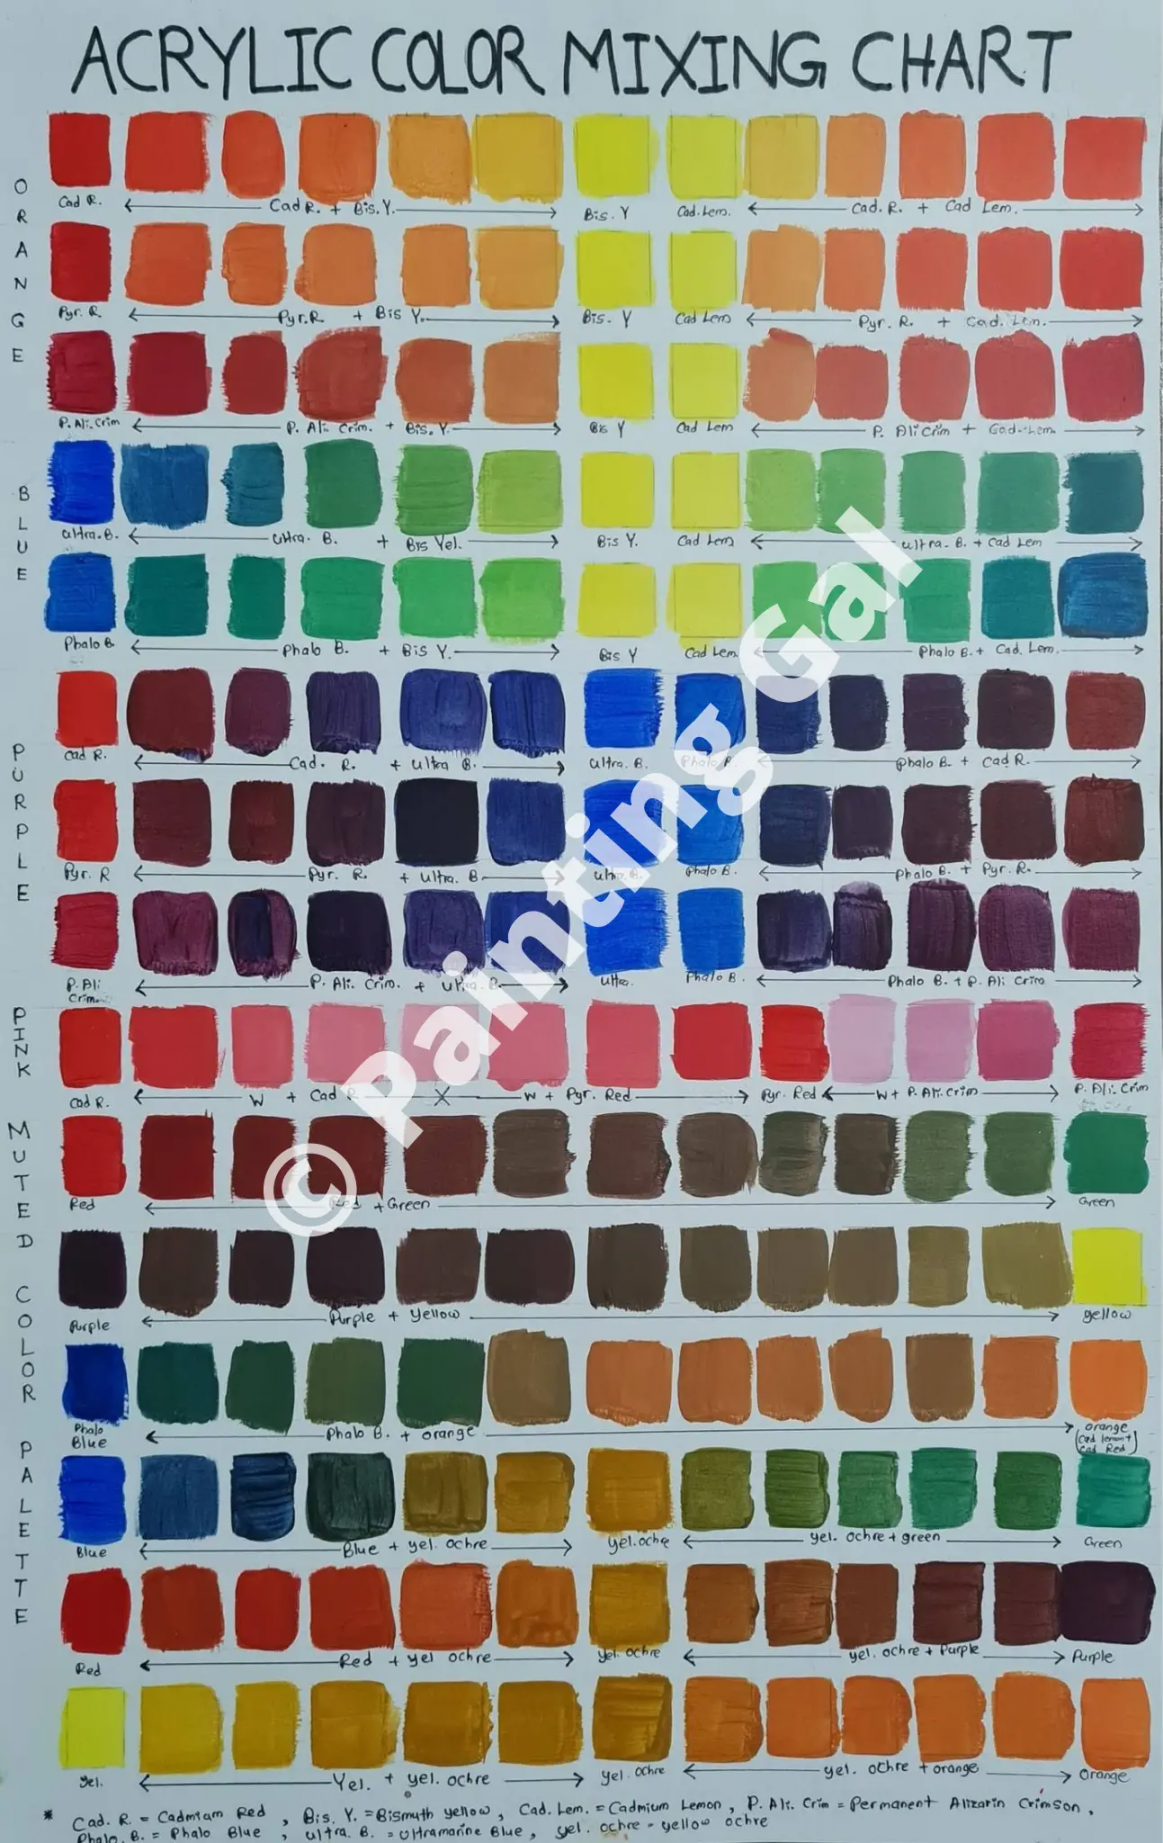 Acrylic paint color mixing chart (with free downloadable) - FREE Printables - Free Color Mixing Chart